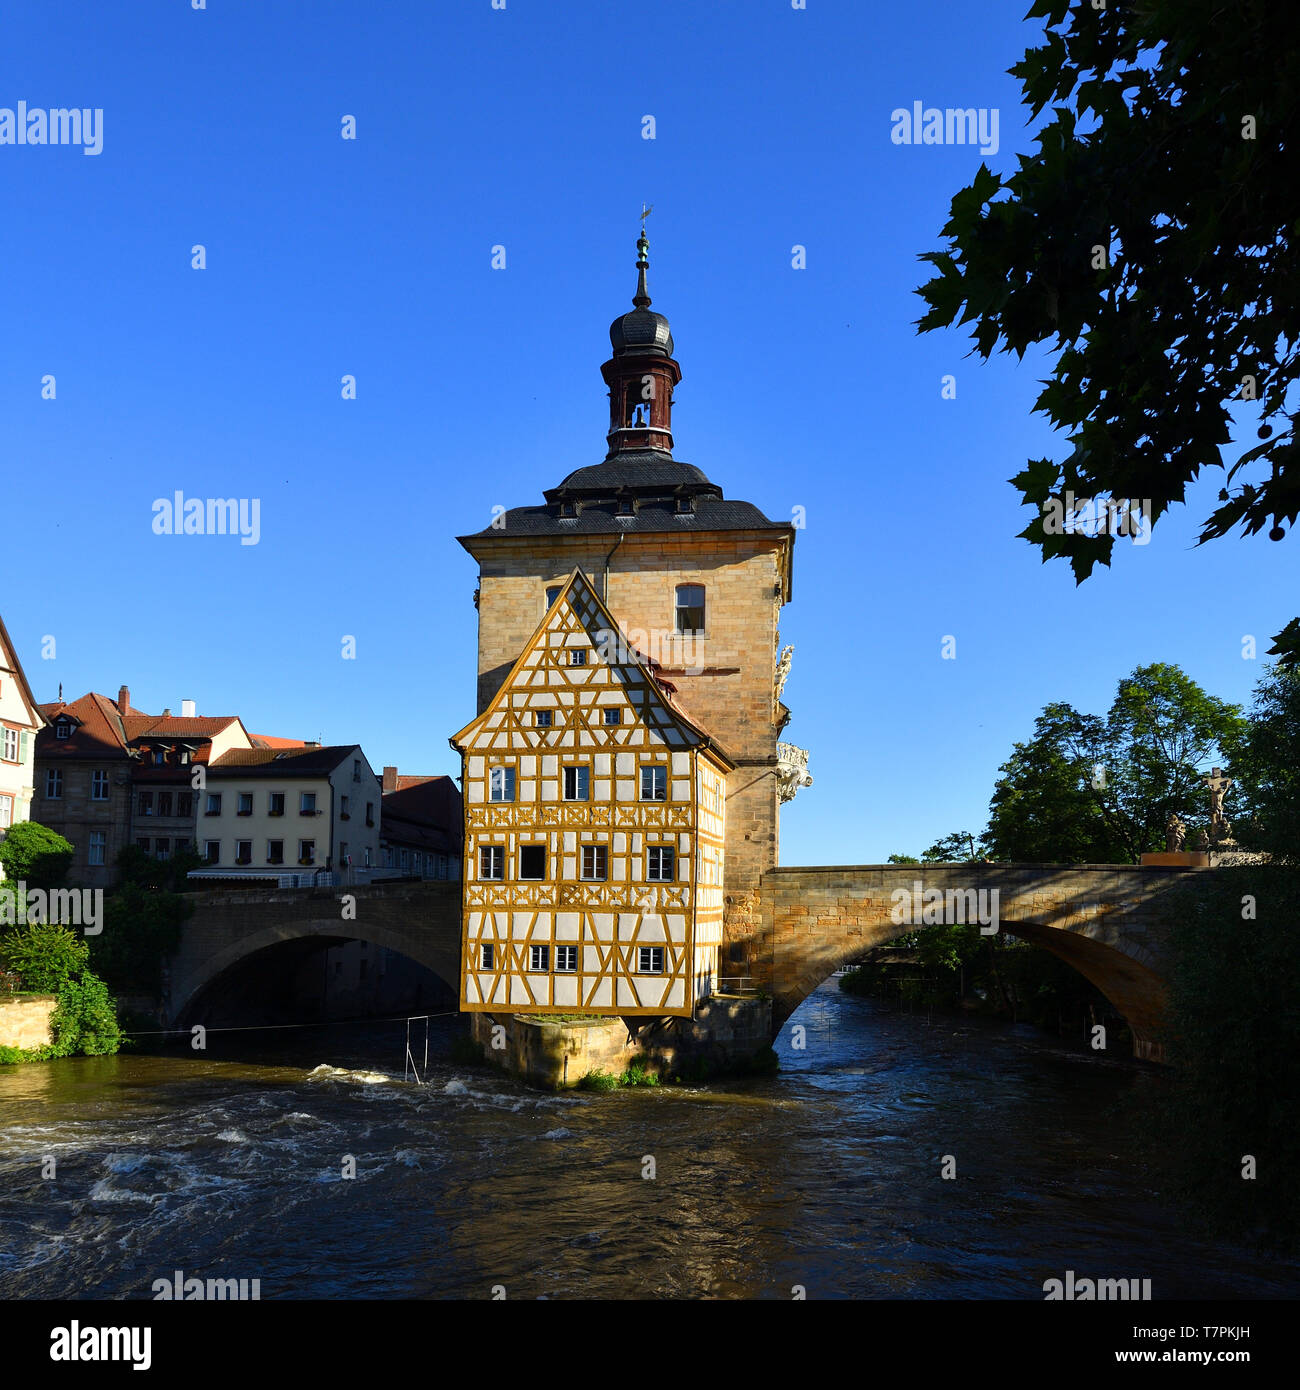 Germany, Bavaria, Upper Franconia Region, Bamberg, listed as World Heritage by UNESCO, Old Town Hall (Altes Rathaus) and Obere Brucke bridge over Regnitz river Stock Photo